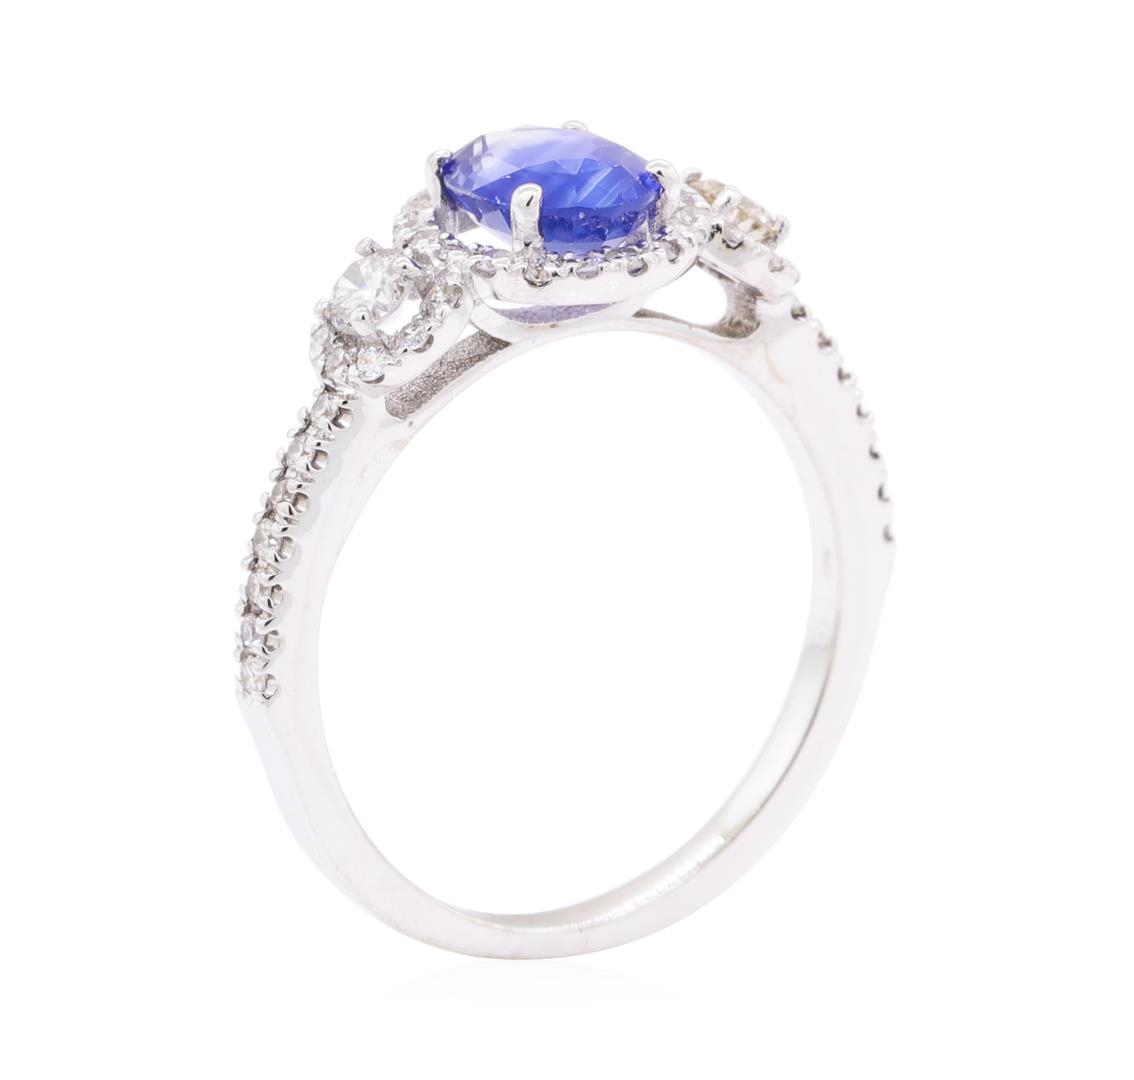 1.64 ctw Sapphire And Diamond Ring - 18KT White Gold